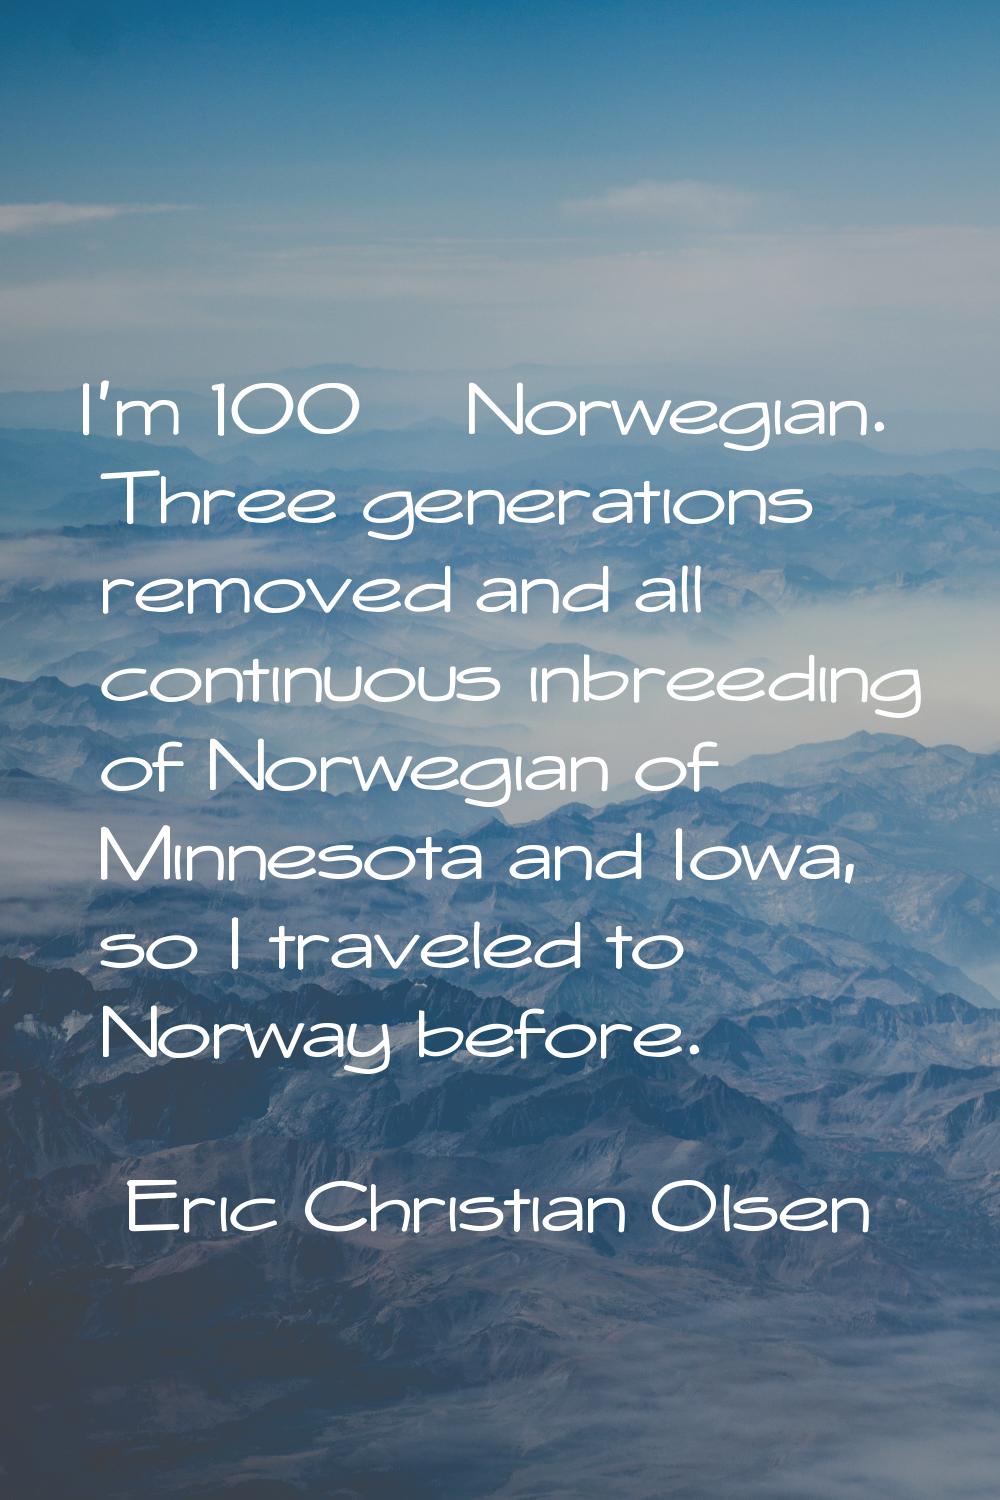 I'm 100% Norwegian. Three generations removed and all continuous inbreeding of Norwegian of Minneso